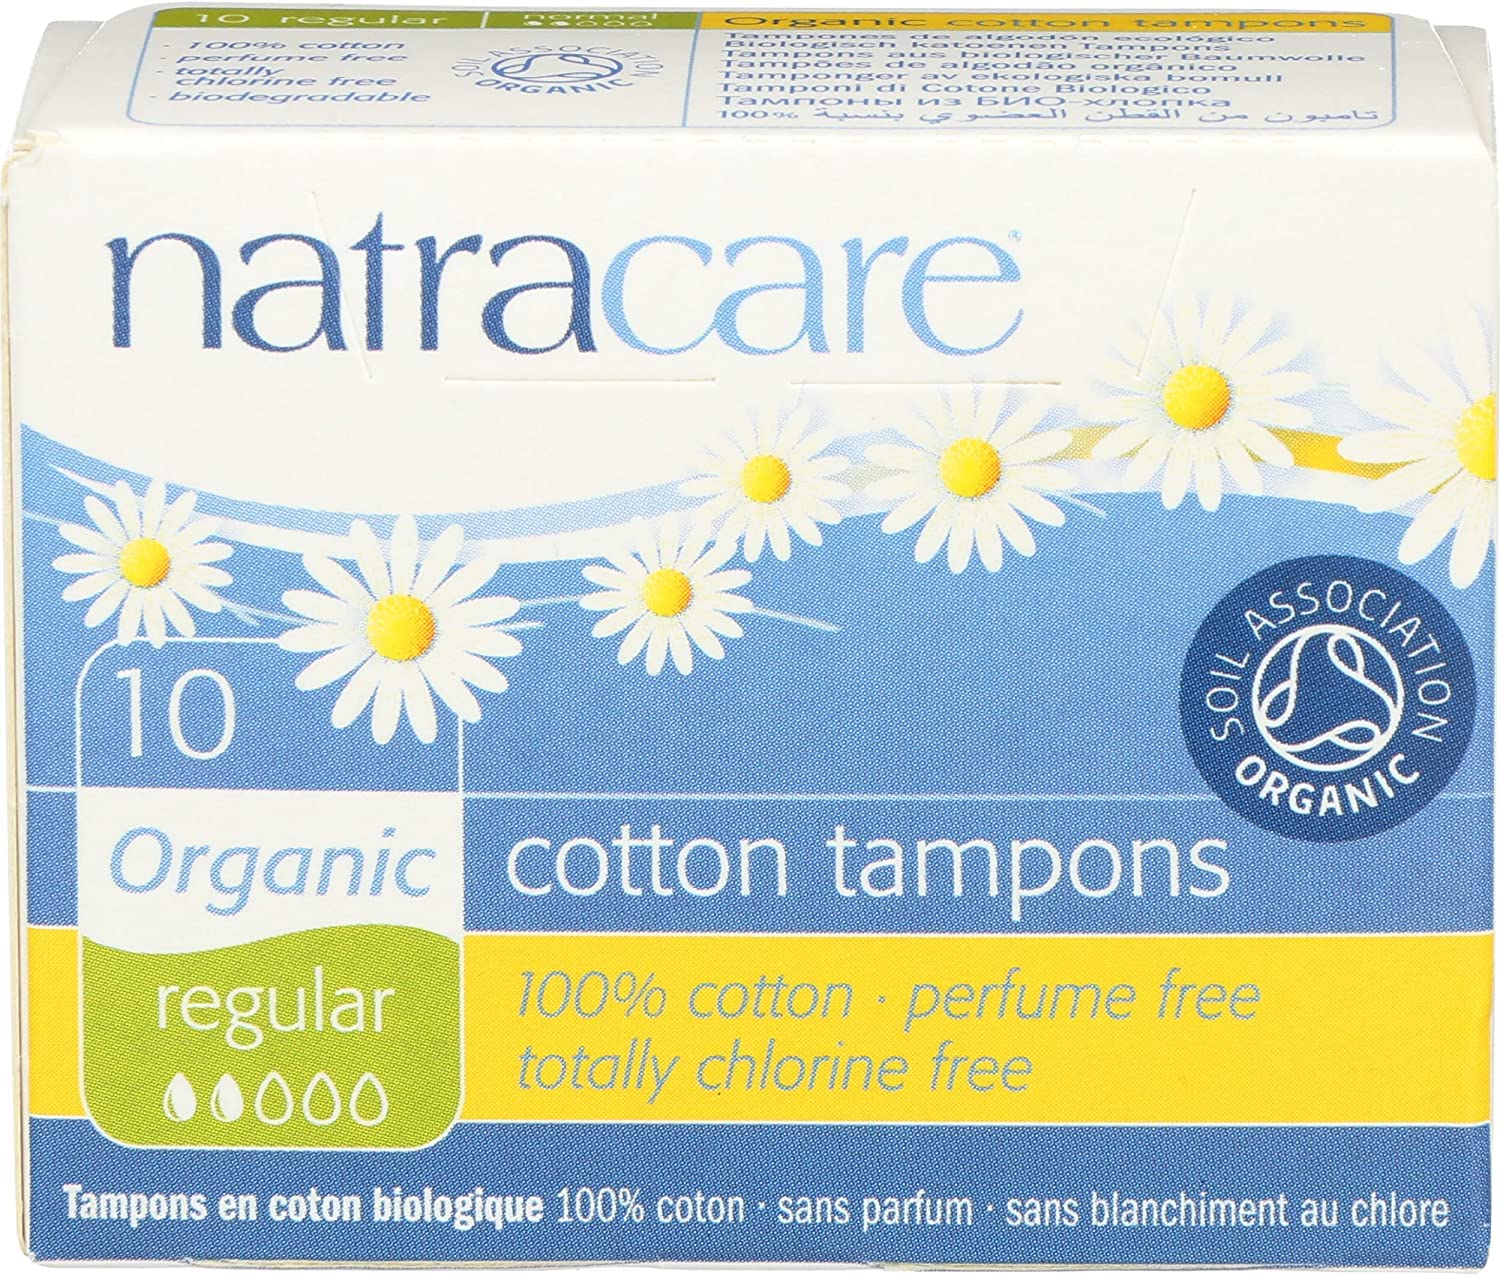 Natracare Tampons Regular 10CT- 8 Pack (80 Total) by NATRACARE